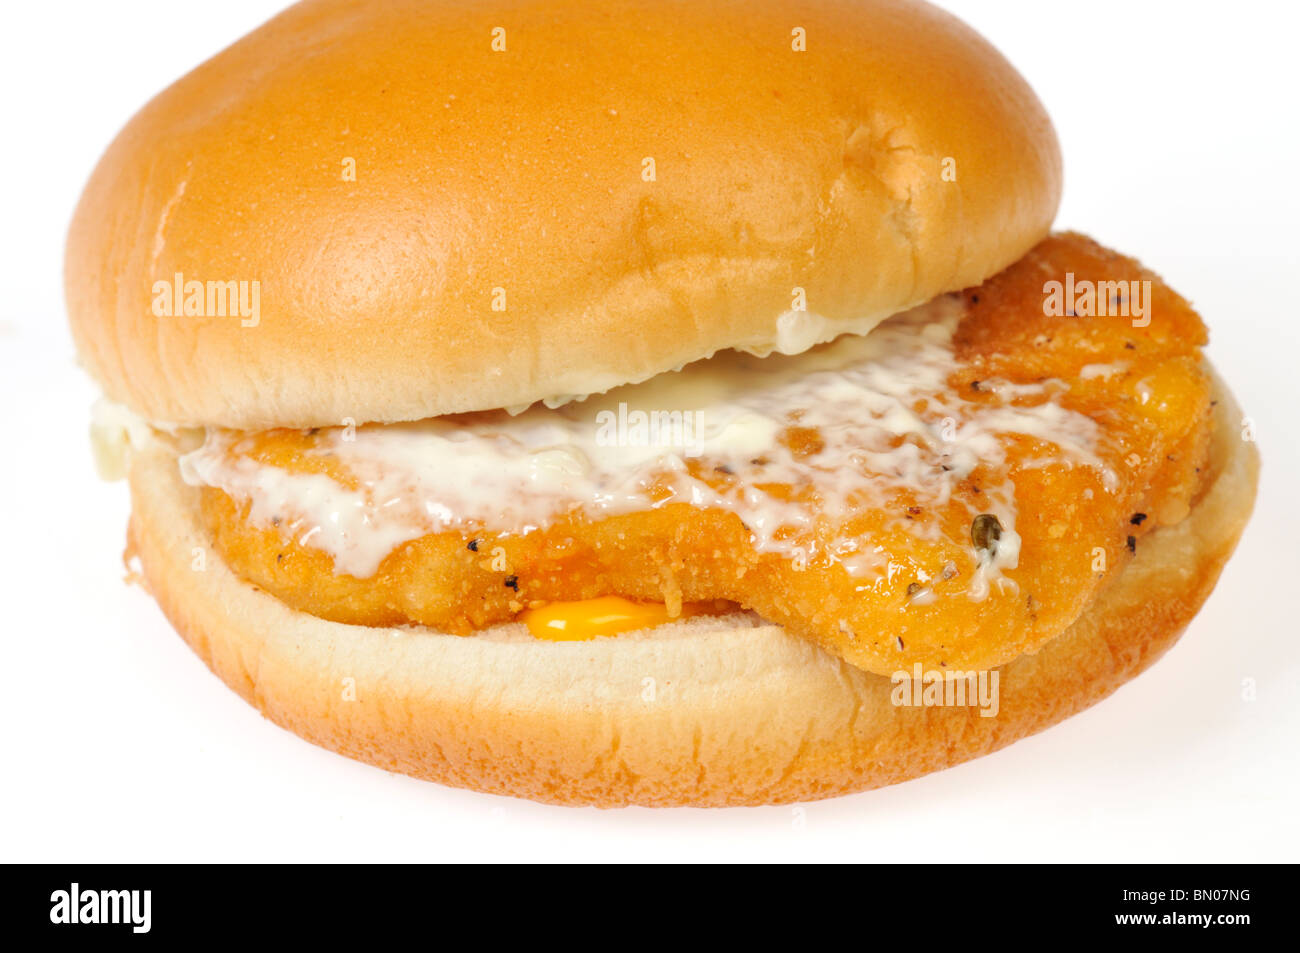 Filet of Fish Sandwich with tartar sauce and cheese on a bun on white background. Stock Photo